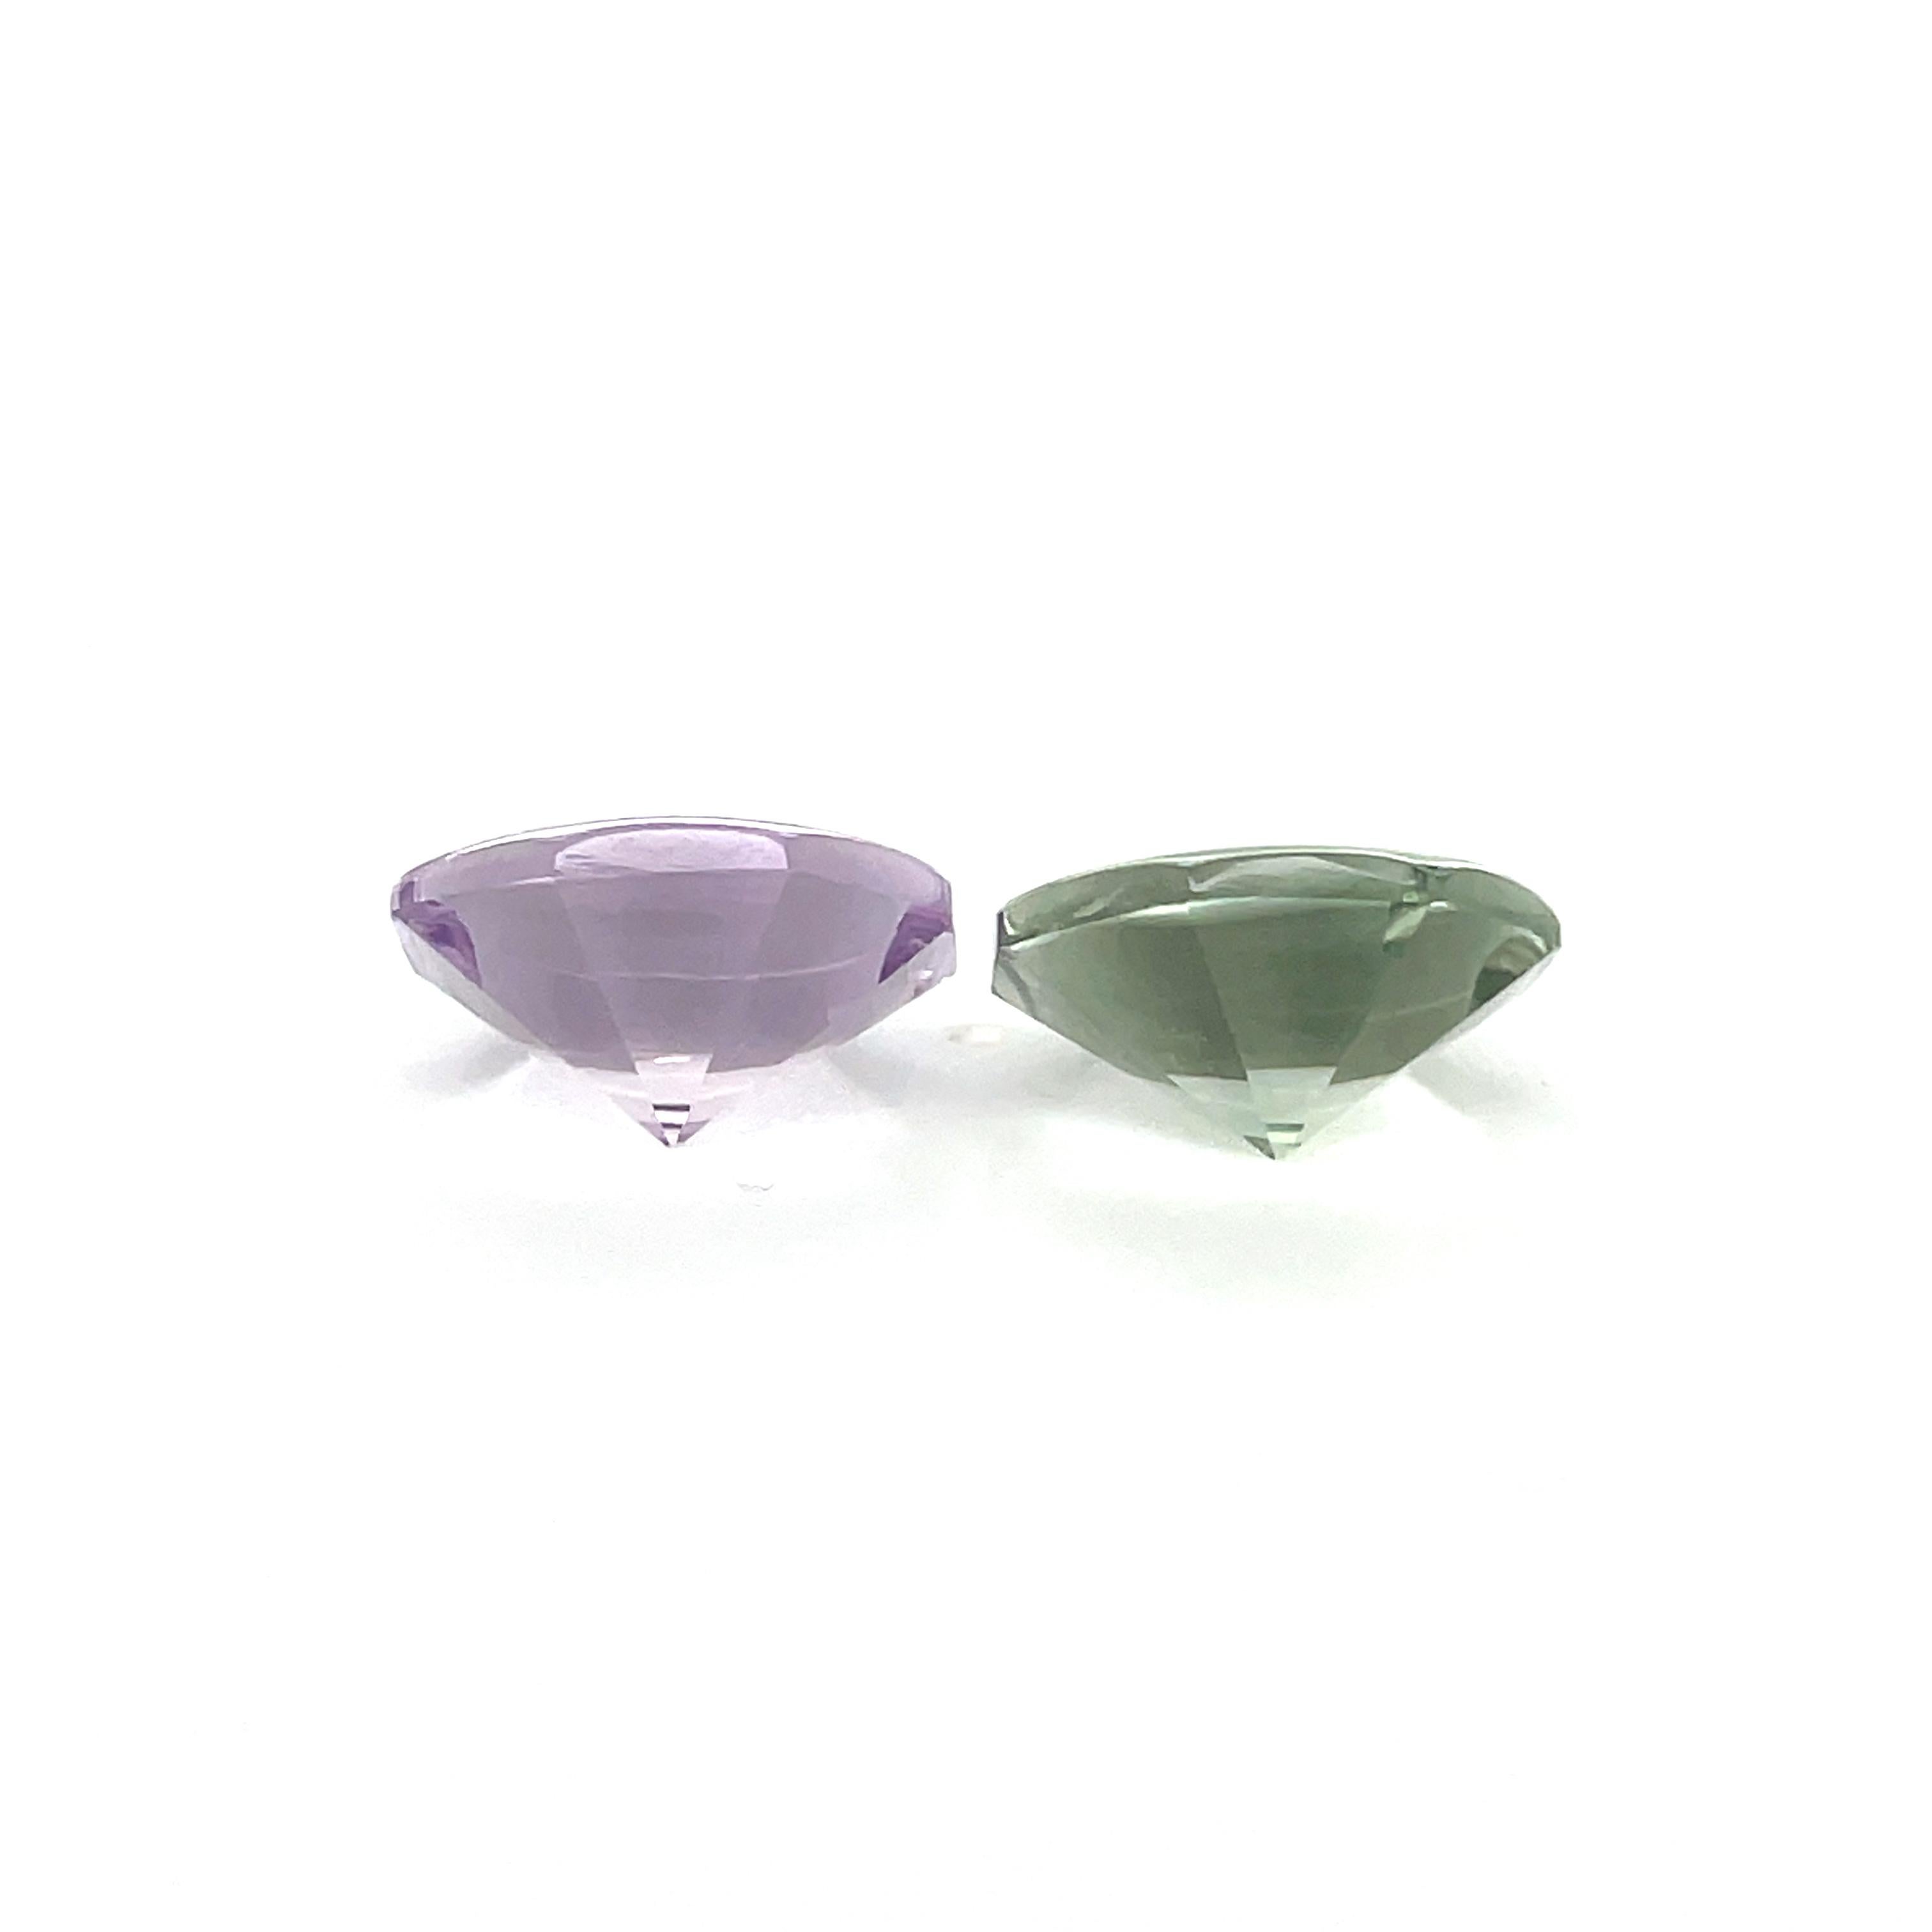 Explore the captivating world of pink and green tourmaline with our stunning octagon-shaped gemstones, boasting a total weight of 18.40 carats. 

The pink stone measures 14.8 x 14.8 mm, while the green stone measures 15 x 15 mm. 

There are no